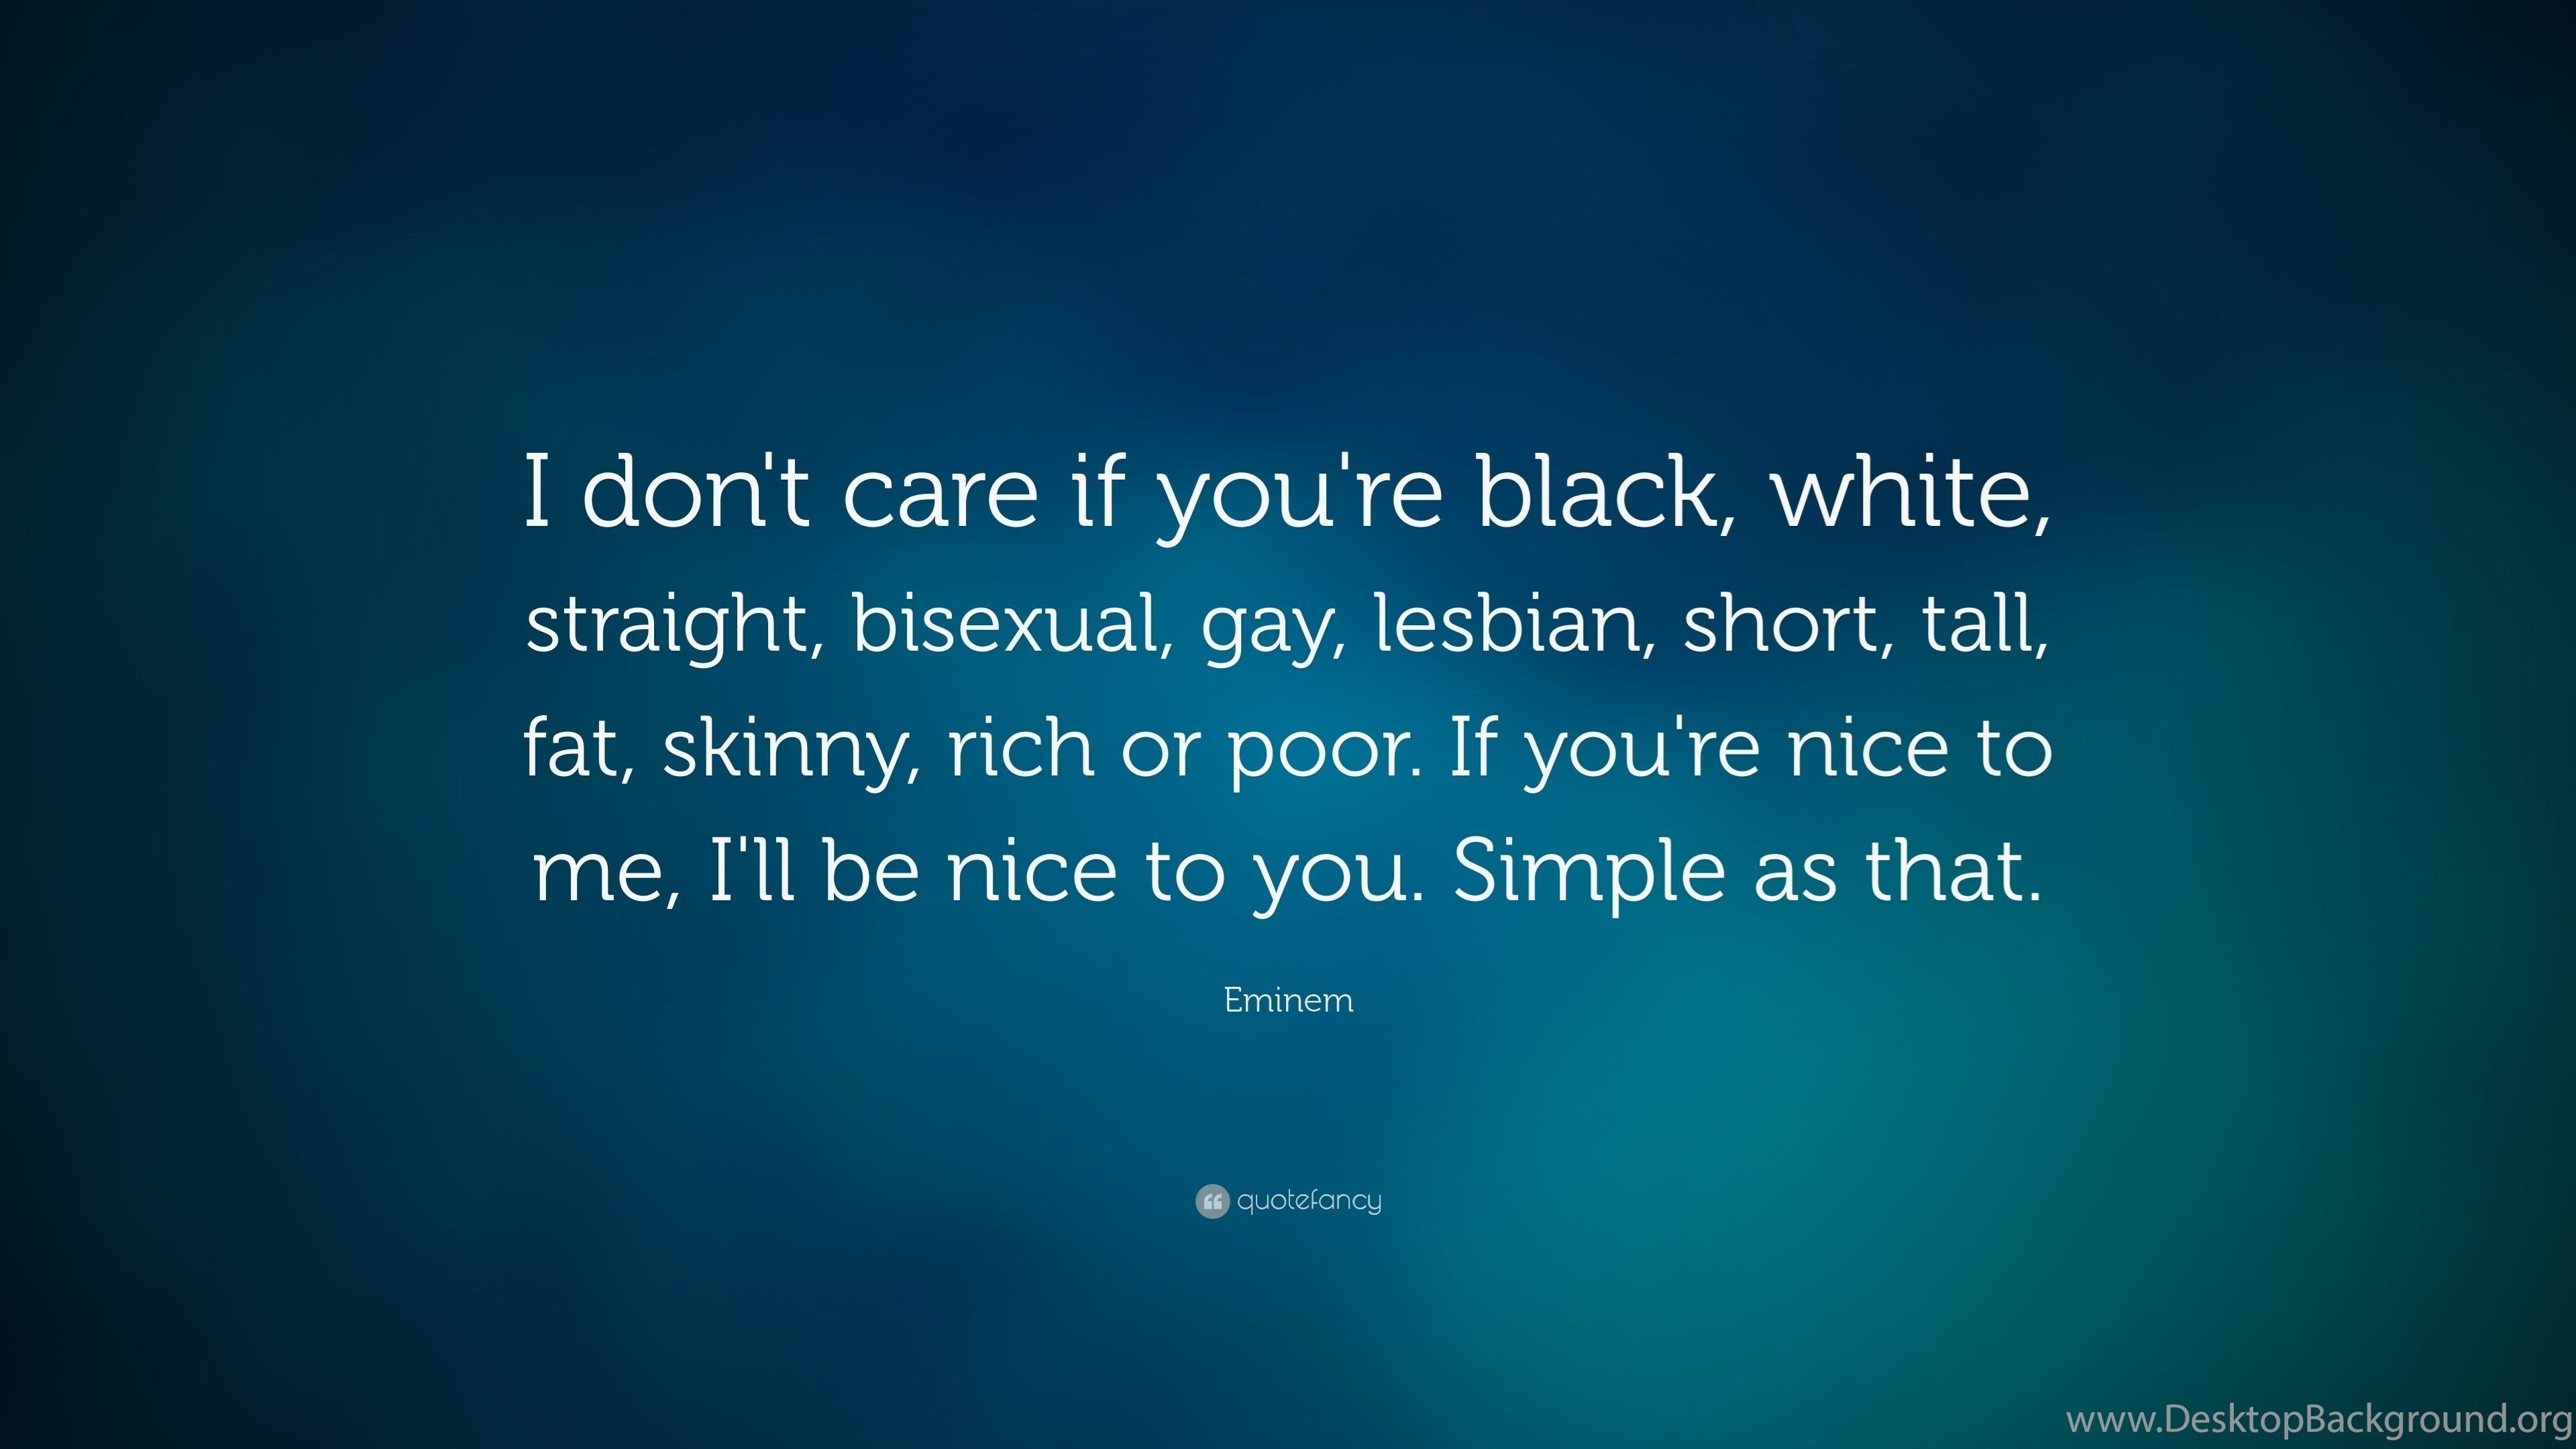 Eminem Quote: “I Don't Care If You're Black, White, Straight. Desktop Background